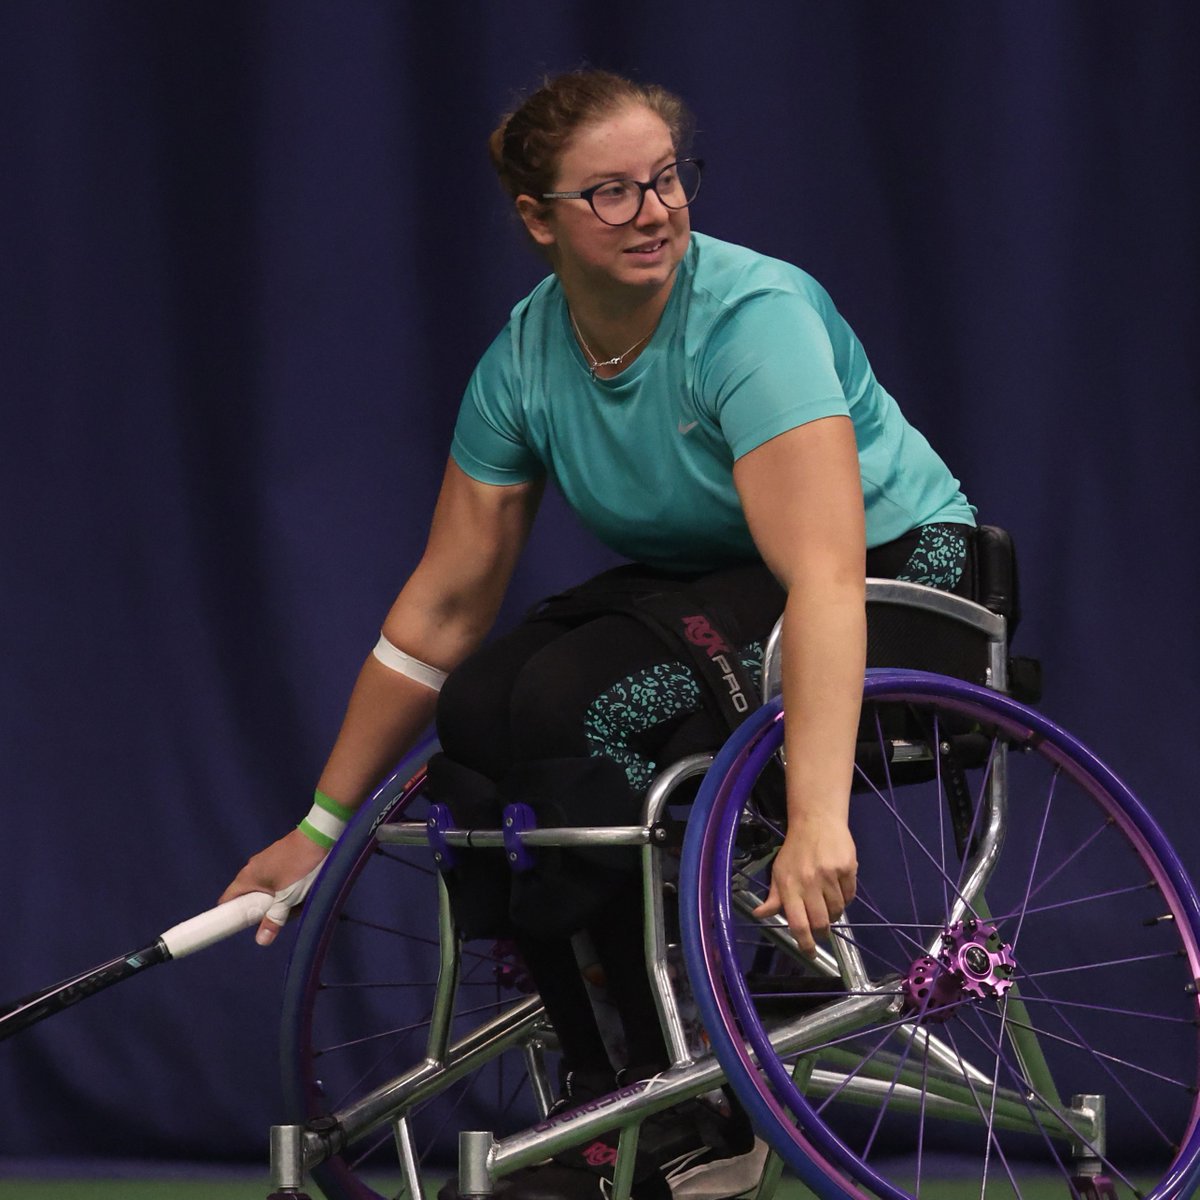 Racing through to women's singles R2 in Turkey @AbbieBreakwell makes a brilliant start to the Kemal Sahin Cup in Antalya, defeating Yumiko Inoue (JPN) 6-0, 6-0 to set up a meeting with top seed Angelica Bernal (COL). #BackTheBrits 🇬🇧 | #wheelchairtennis